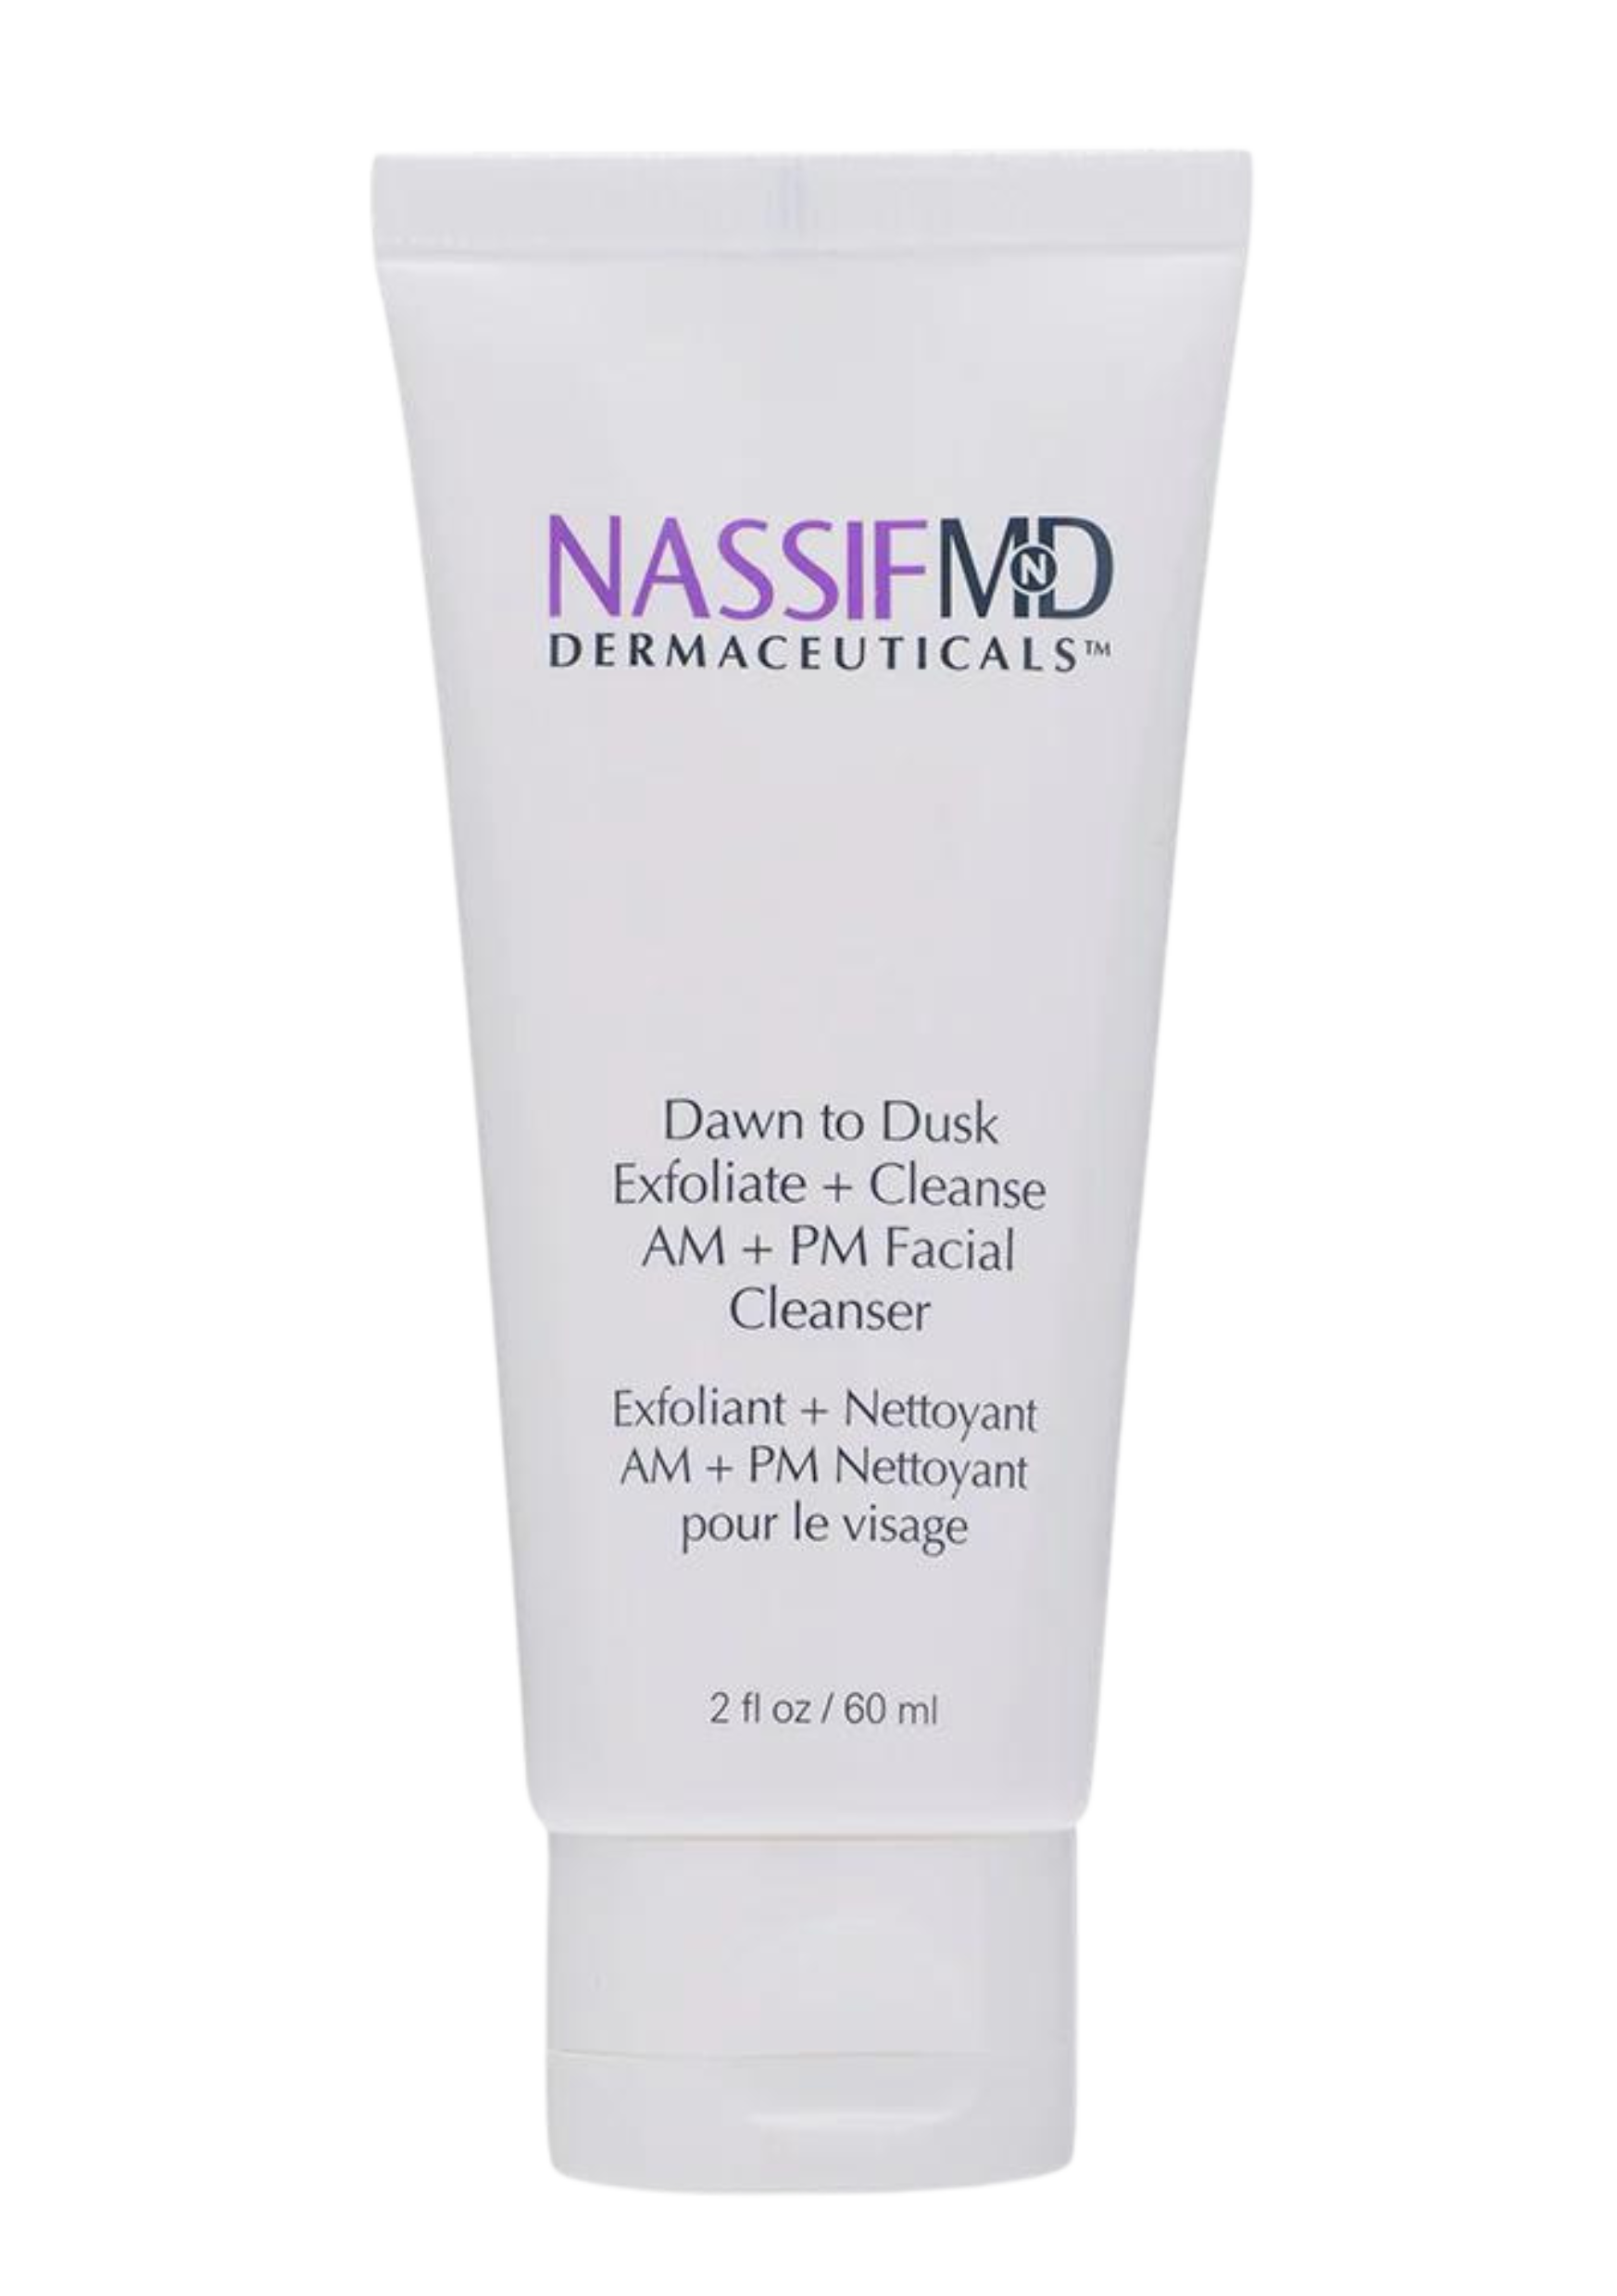 Nassif MD® Dawn to Dusk Exfoliate + Cleanse (AM & PM) Facial Cleanser